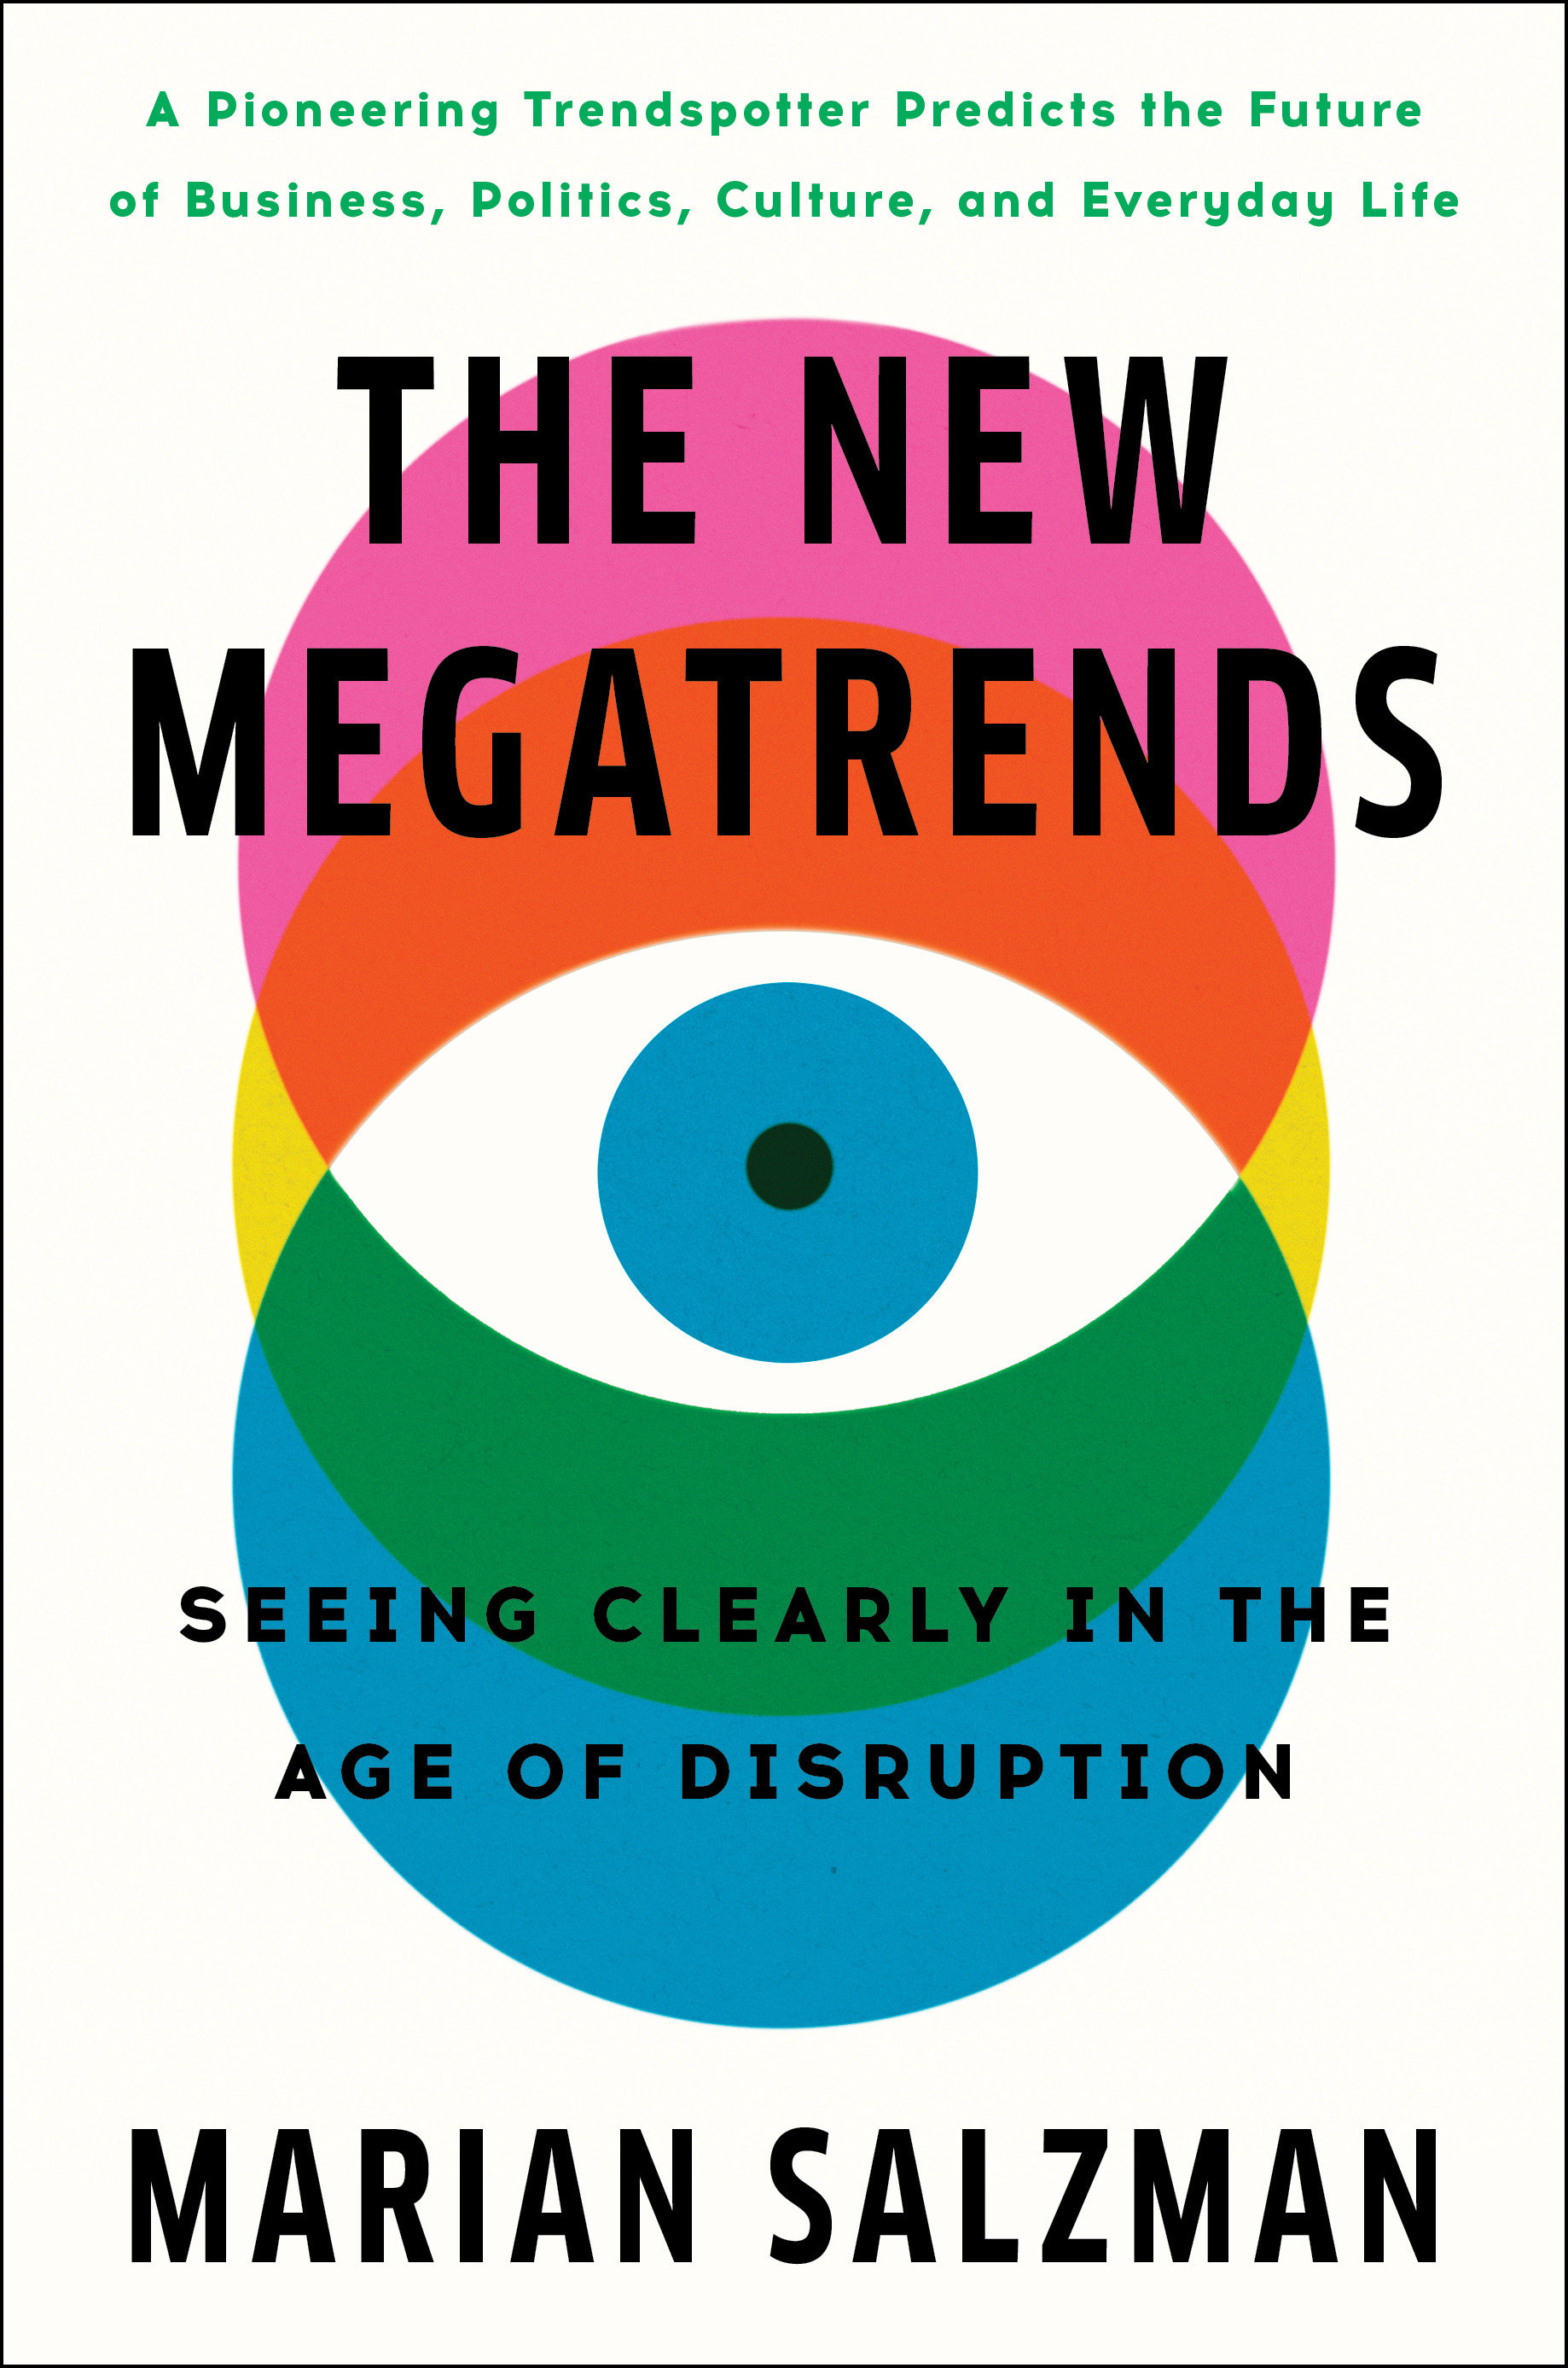 The New Megatrends (Hardcover Book)